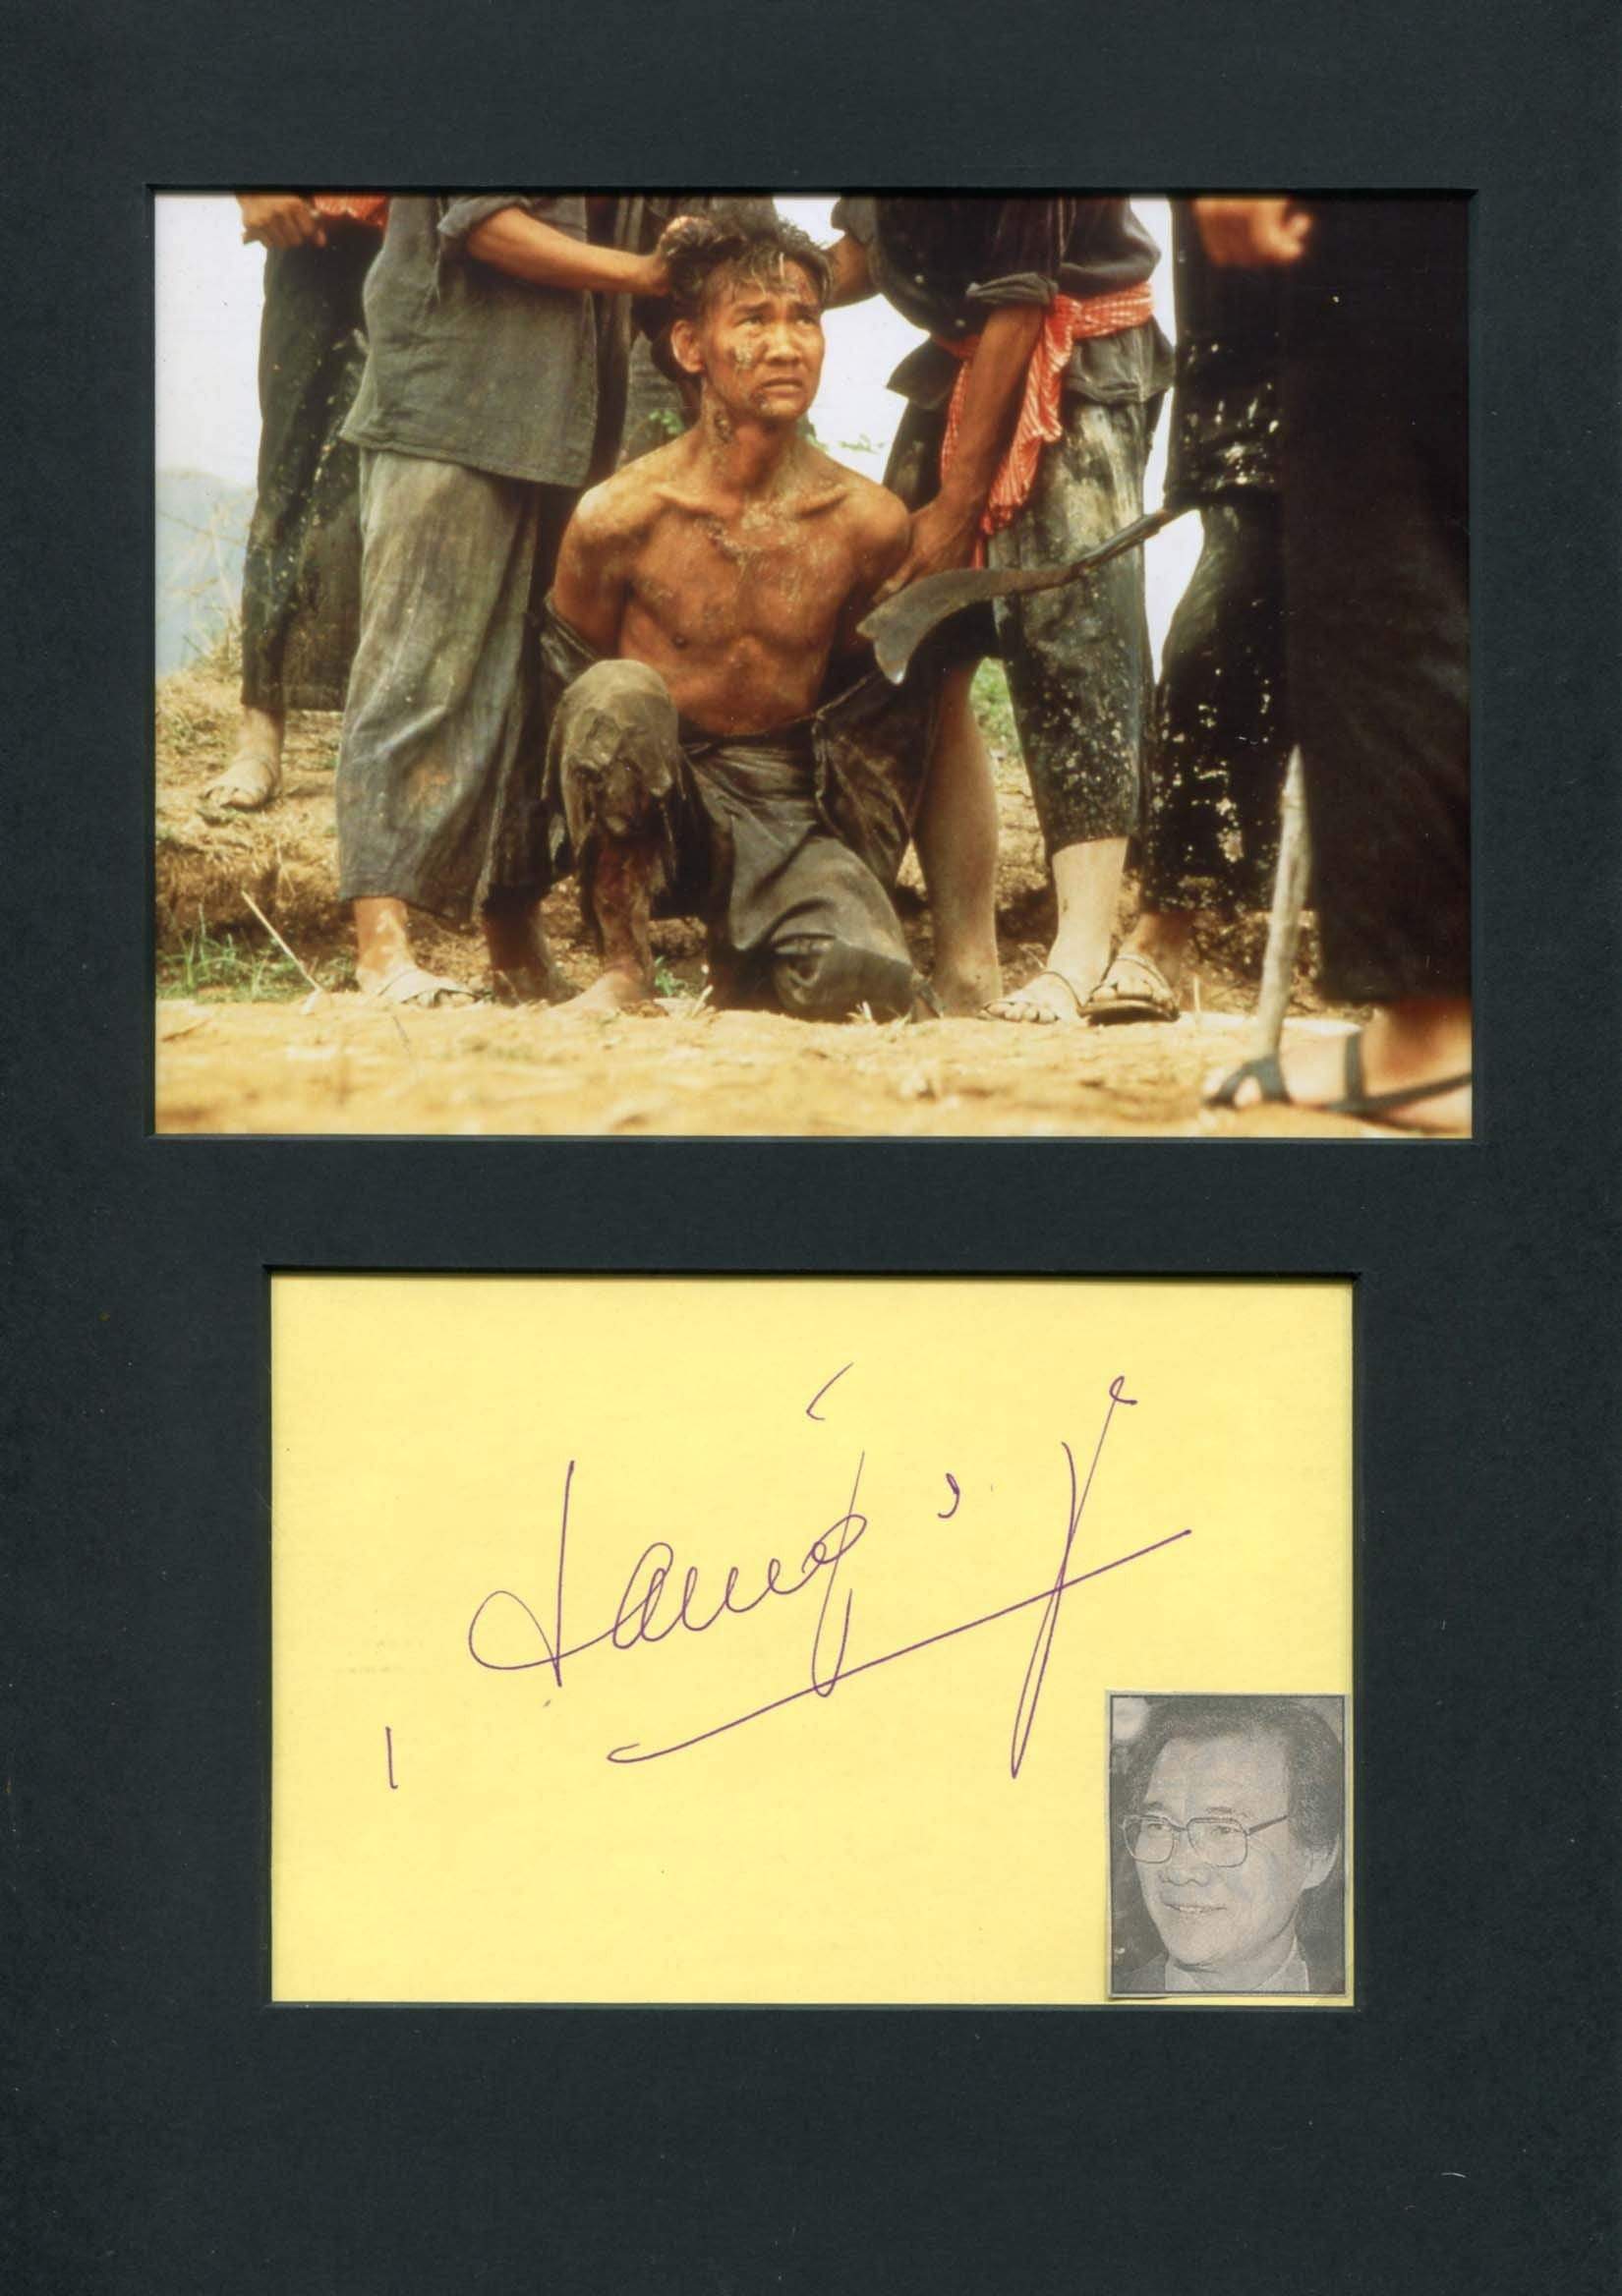 Ngor, Haing S. autograph